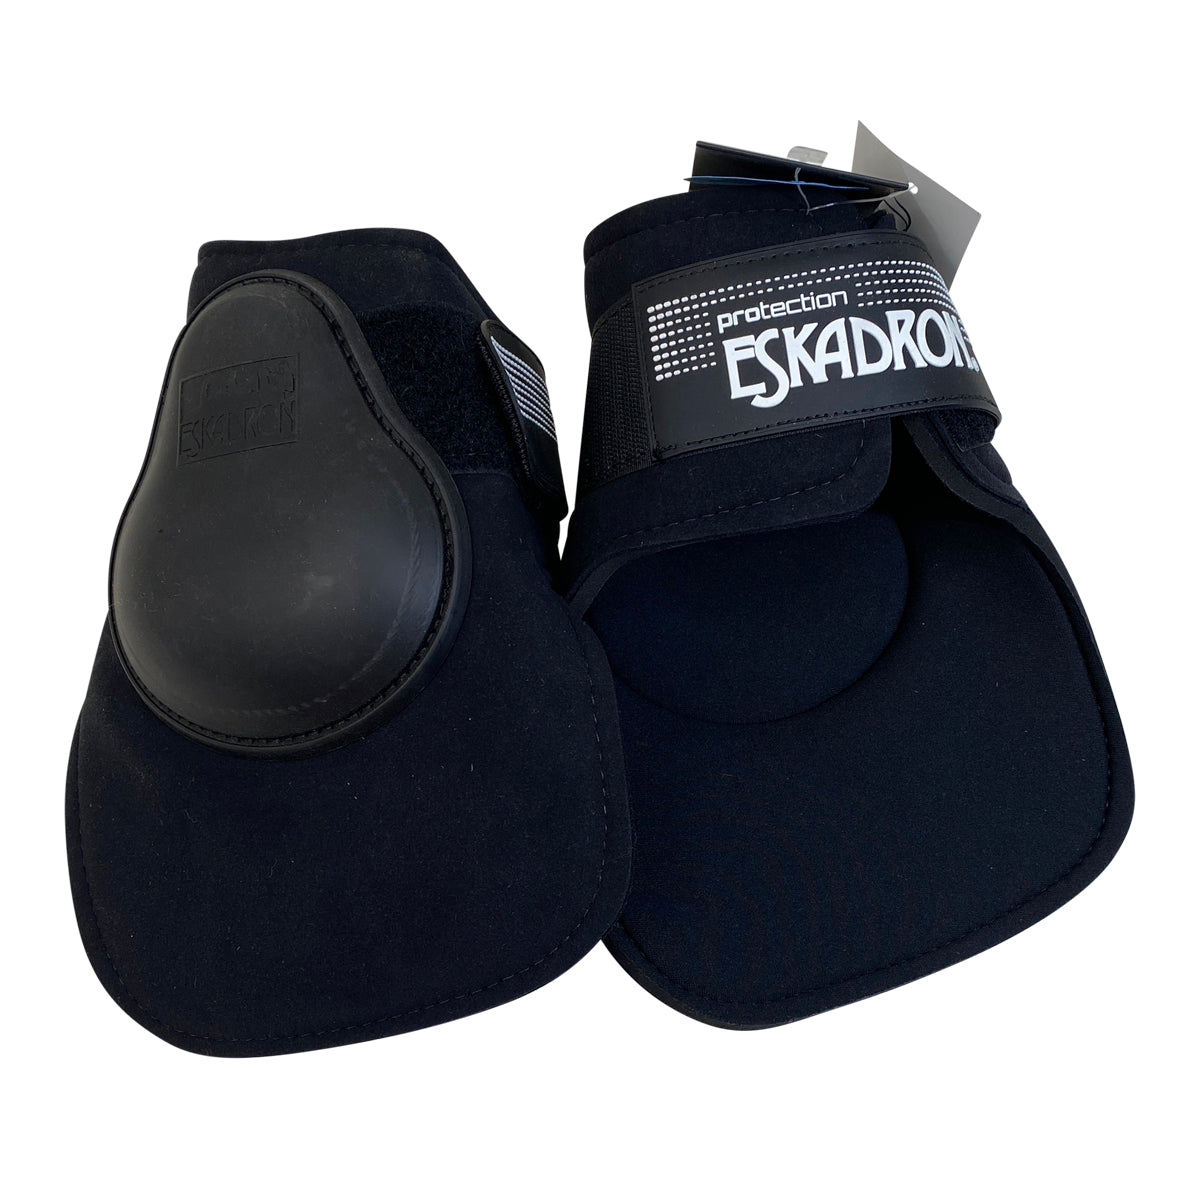 Eskadron Protection 'Special H' Fetlock Boots in Black